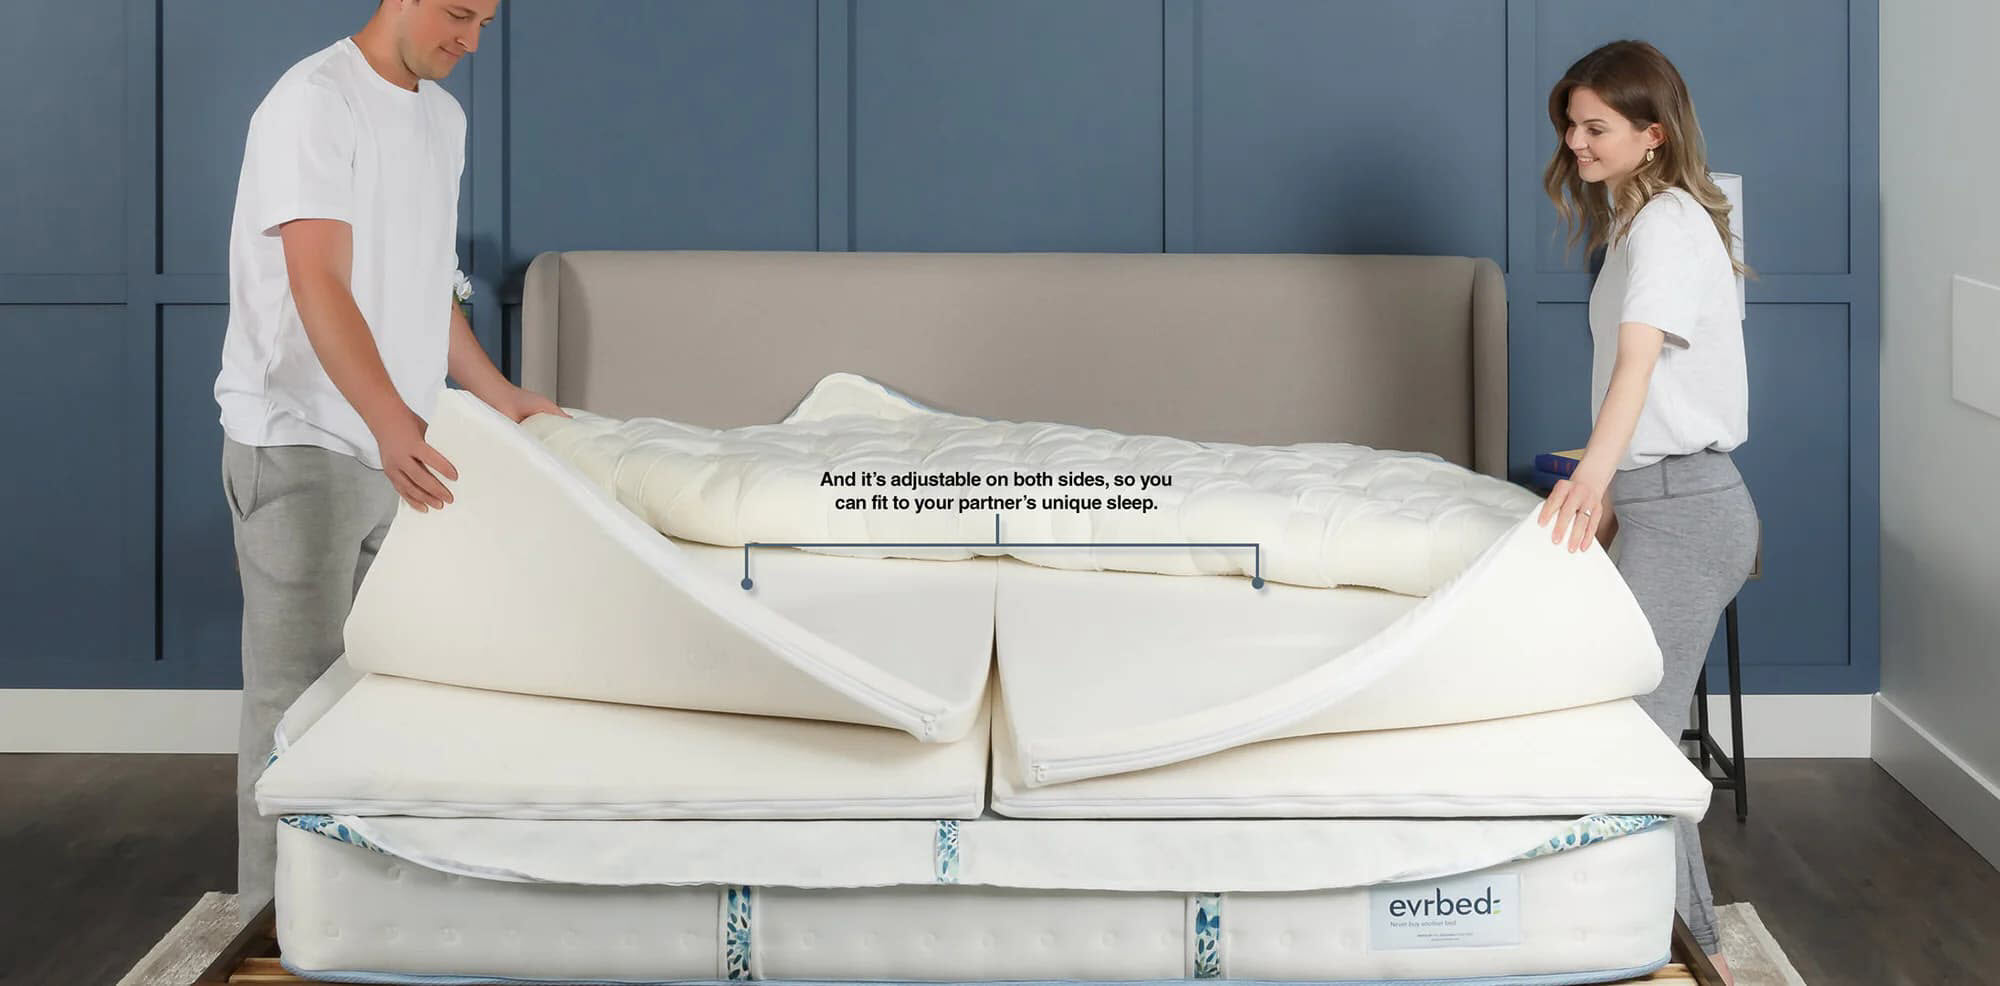 Why Shopping for a Mattress Is So Confusing